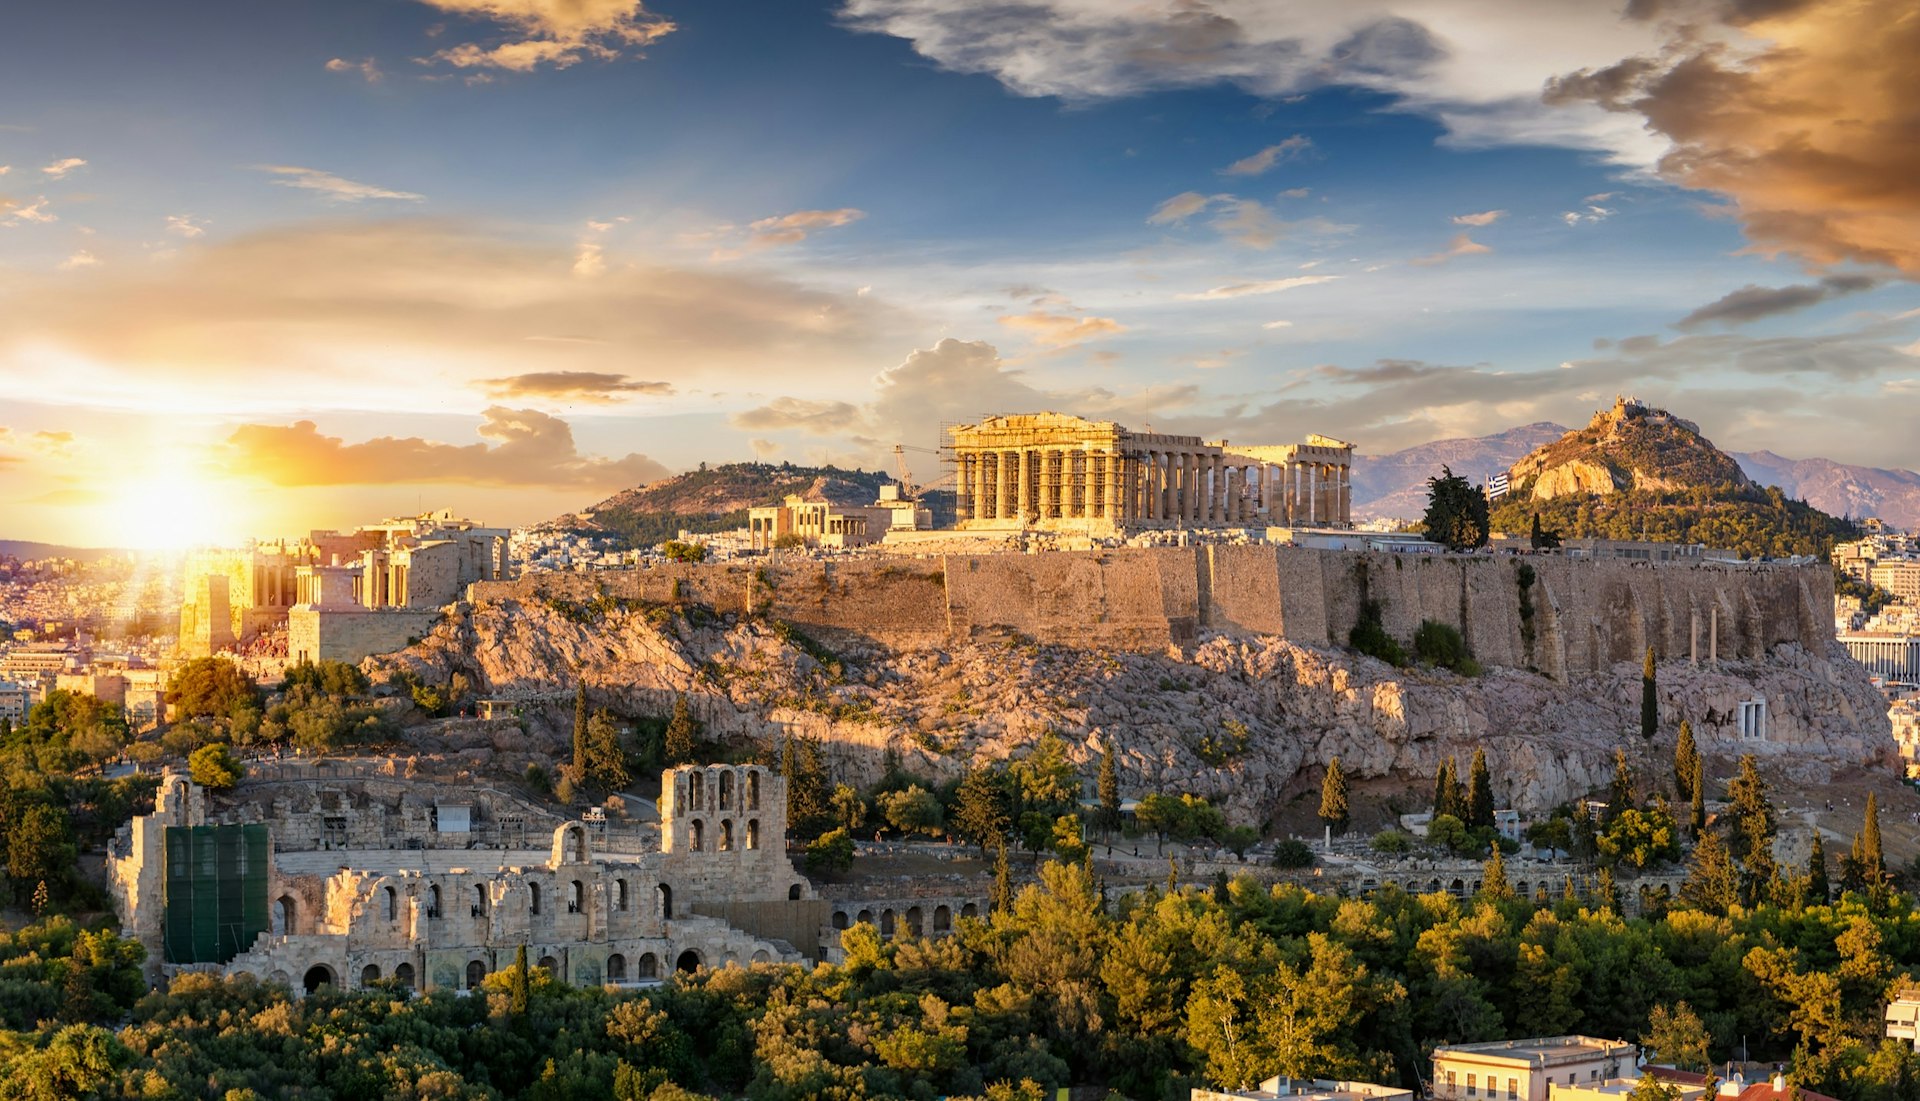 The,Acropolis,Of,Athens,,Greece,,With,The,Parthenon,Temple,On